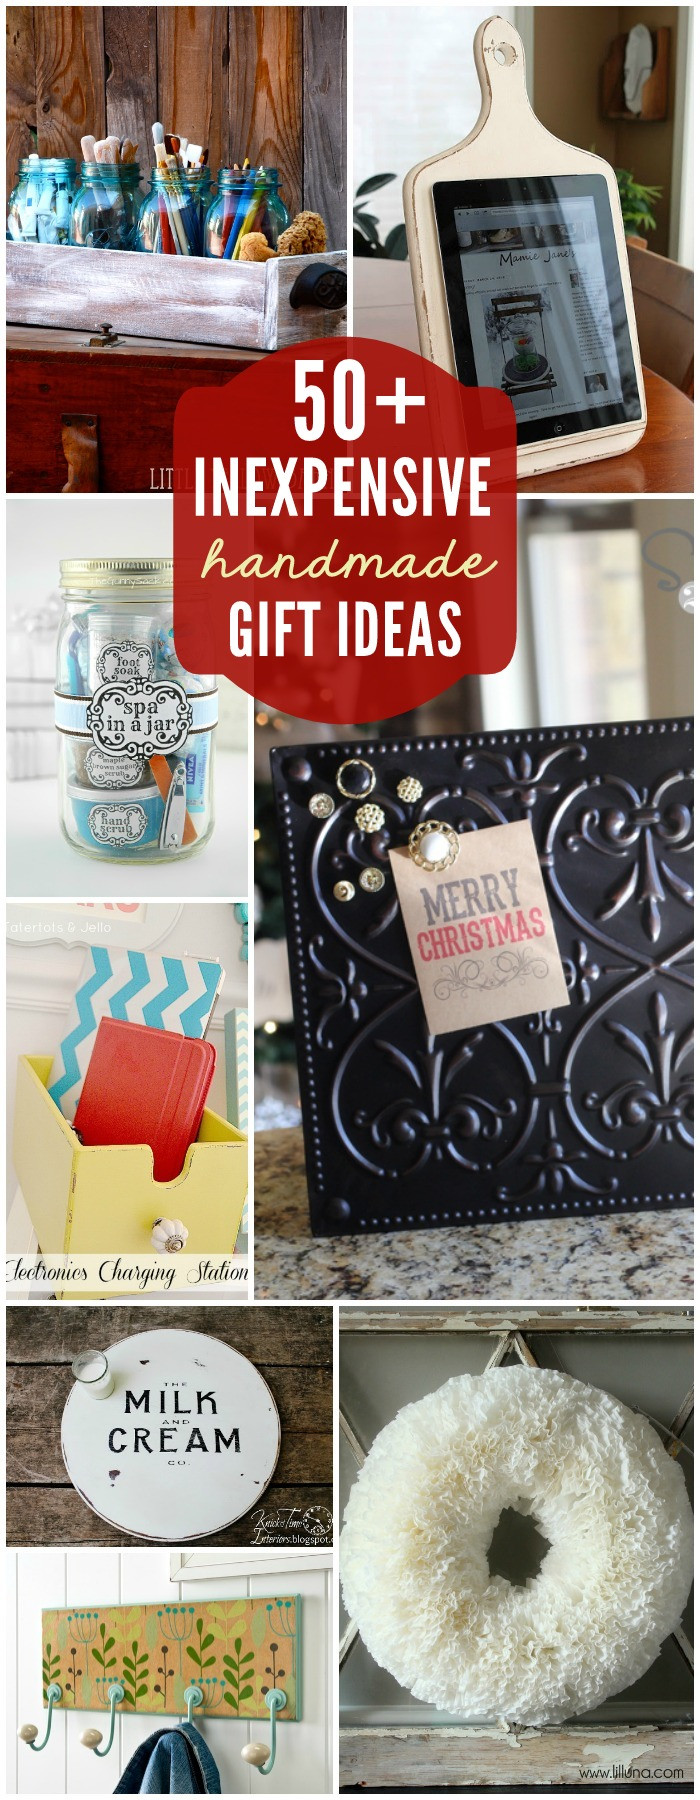 Good DIY Christmas Gifts
 75 Gift Ideas under $5